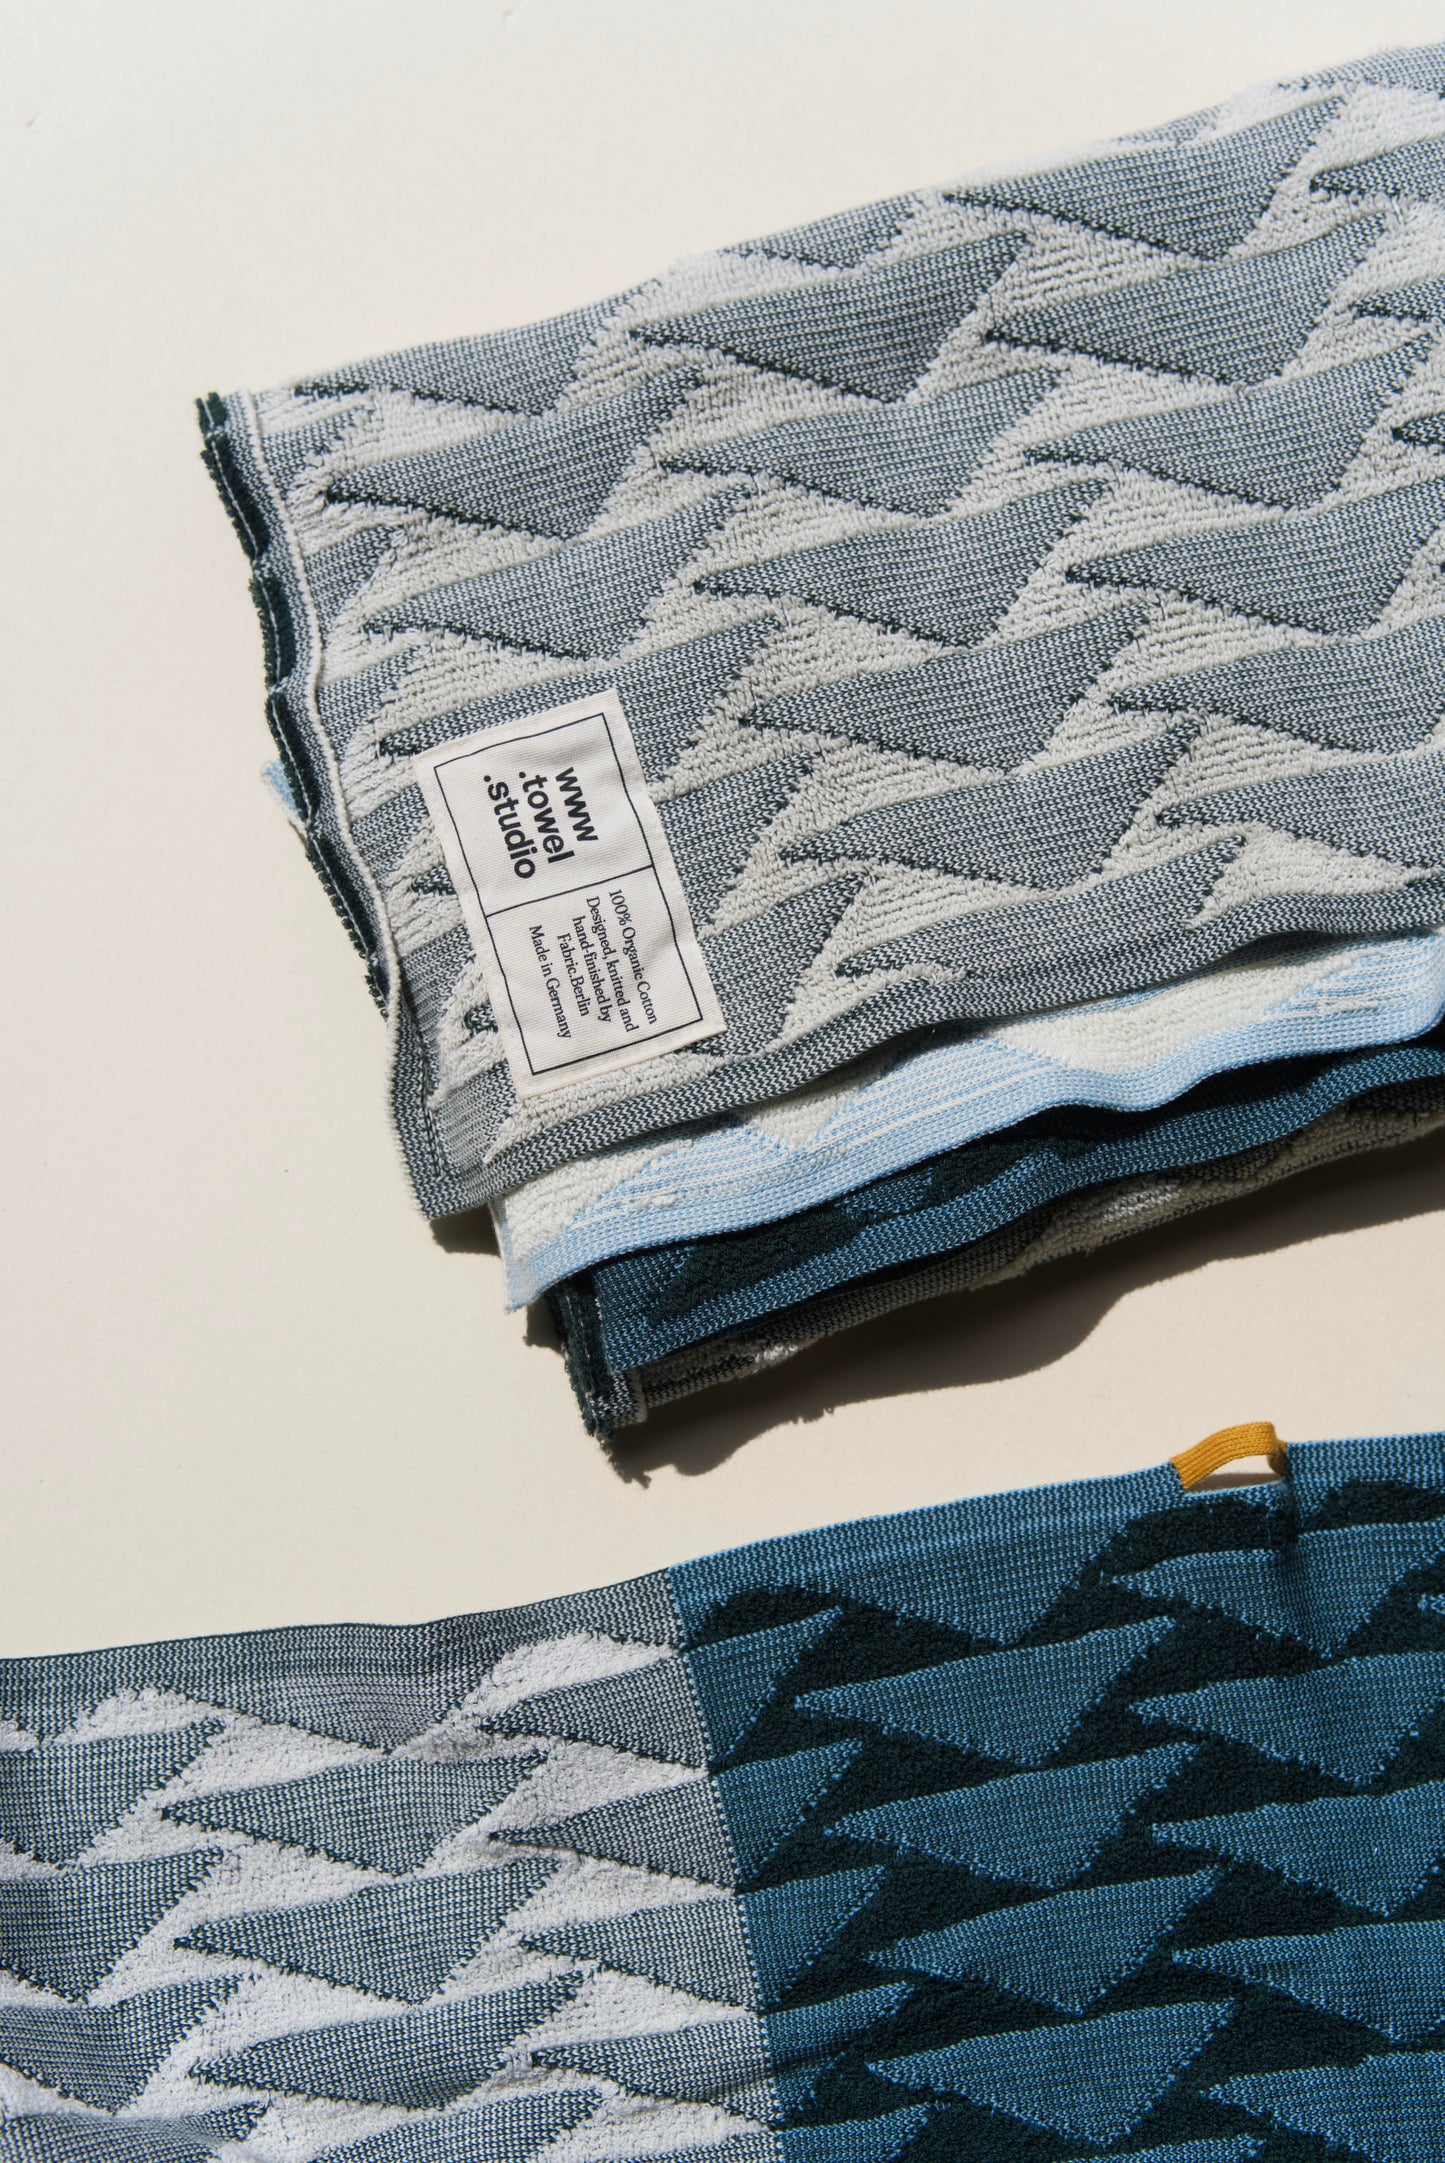 Forest Towel in Rainy Blue